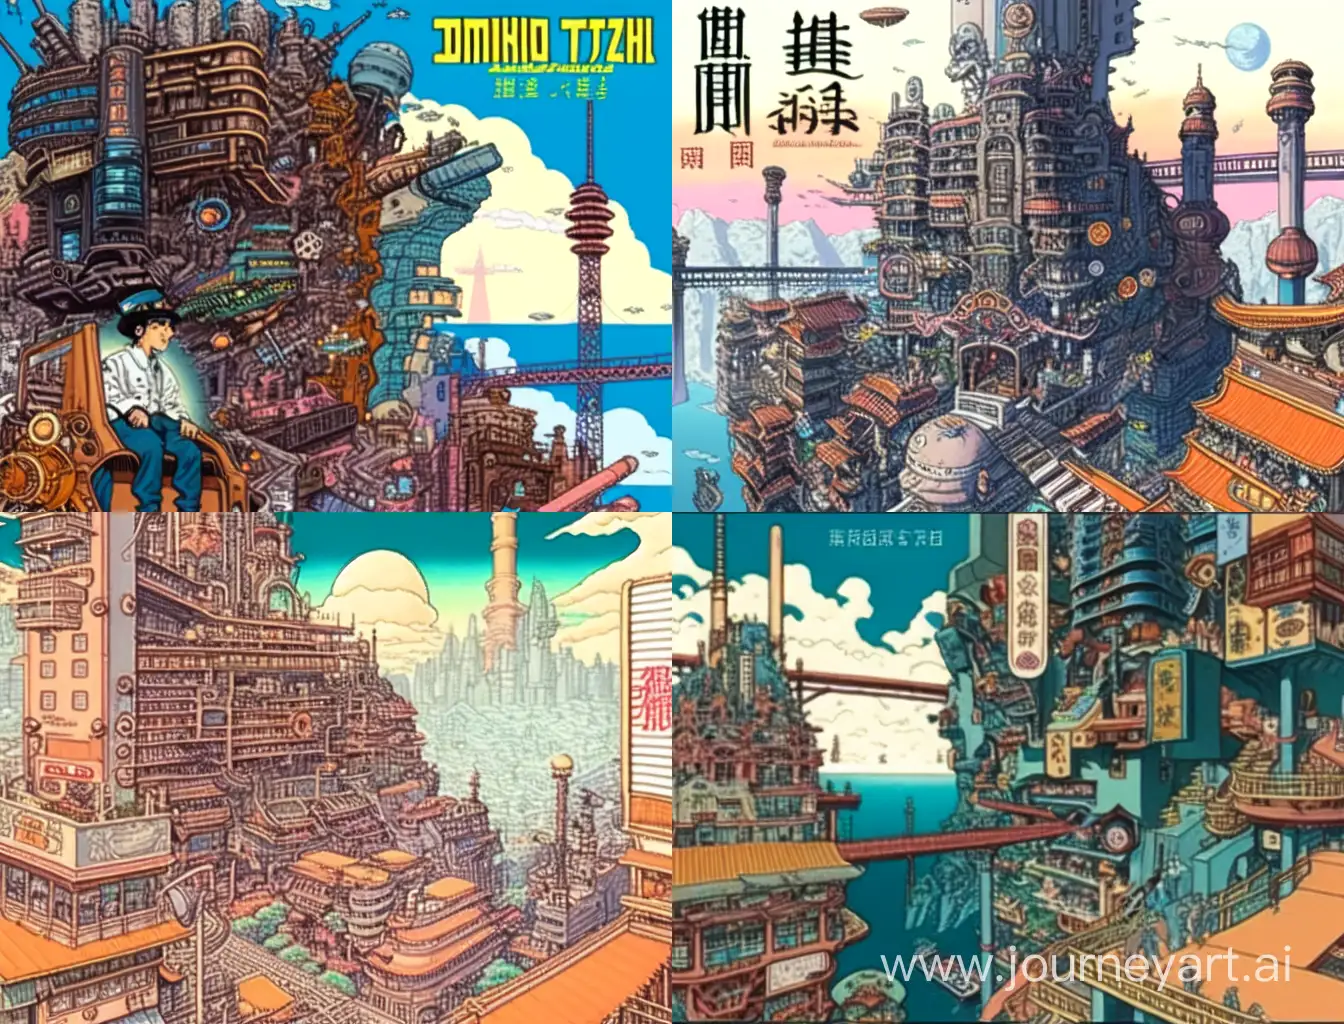 japanese anime poster of a retro, dynamic energy and rich detail, in a style of marries manga with steampunk aesthetic, detailed line art and a muted color scheme dominated by shades of blue and brown. A huge city stands in the sky in the 22nd century. In the forgotten corner, on the lower level of the giant structure, are messy and vibrant neighborhoods, dividing the boundaries between rich and poor.In a multi-layered city, there is a red-haired female samurai. Her tenacious will is in line with the legendary Japanese samurai spirit. Living with machinery and desolation, quiet ponds and broken concrete are her refuges. As night falls, an old Japanese sword protects the ultimate peace in this new world where chaos and order intersect.